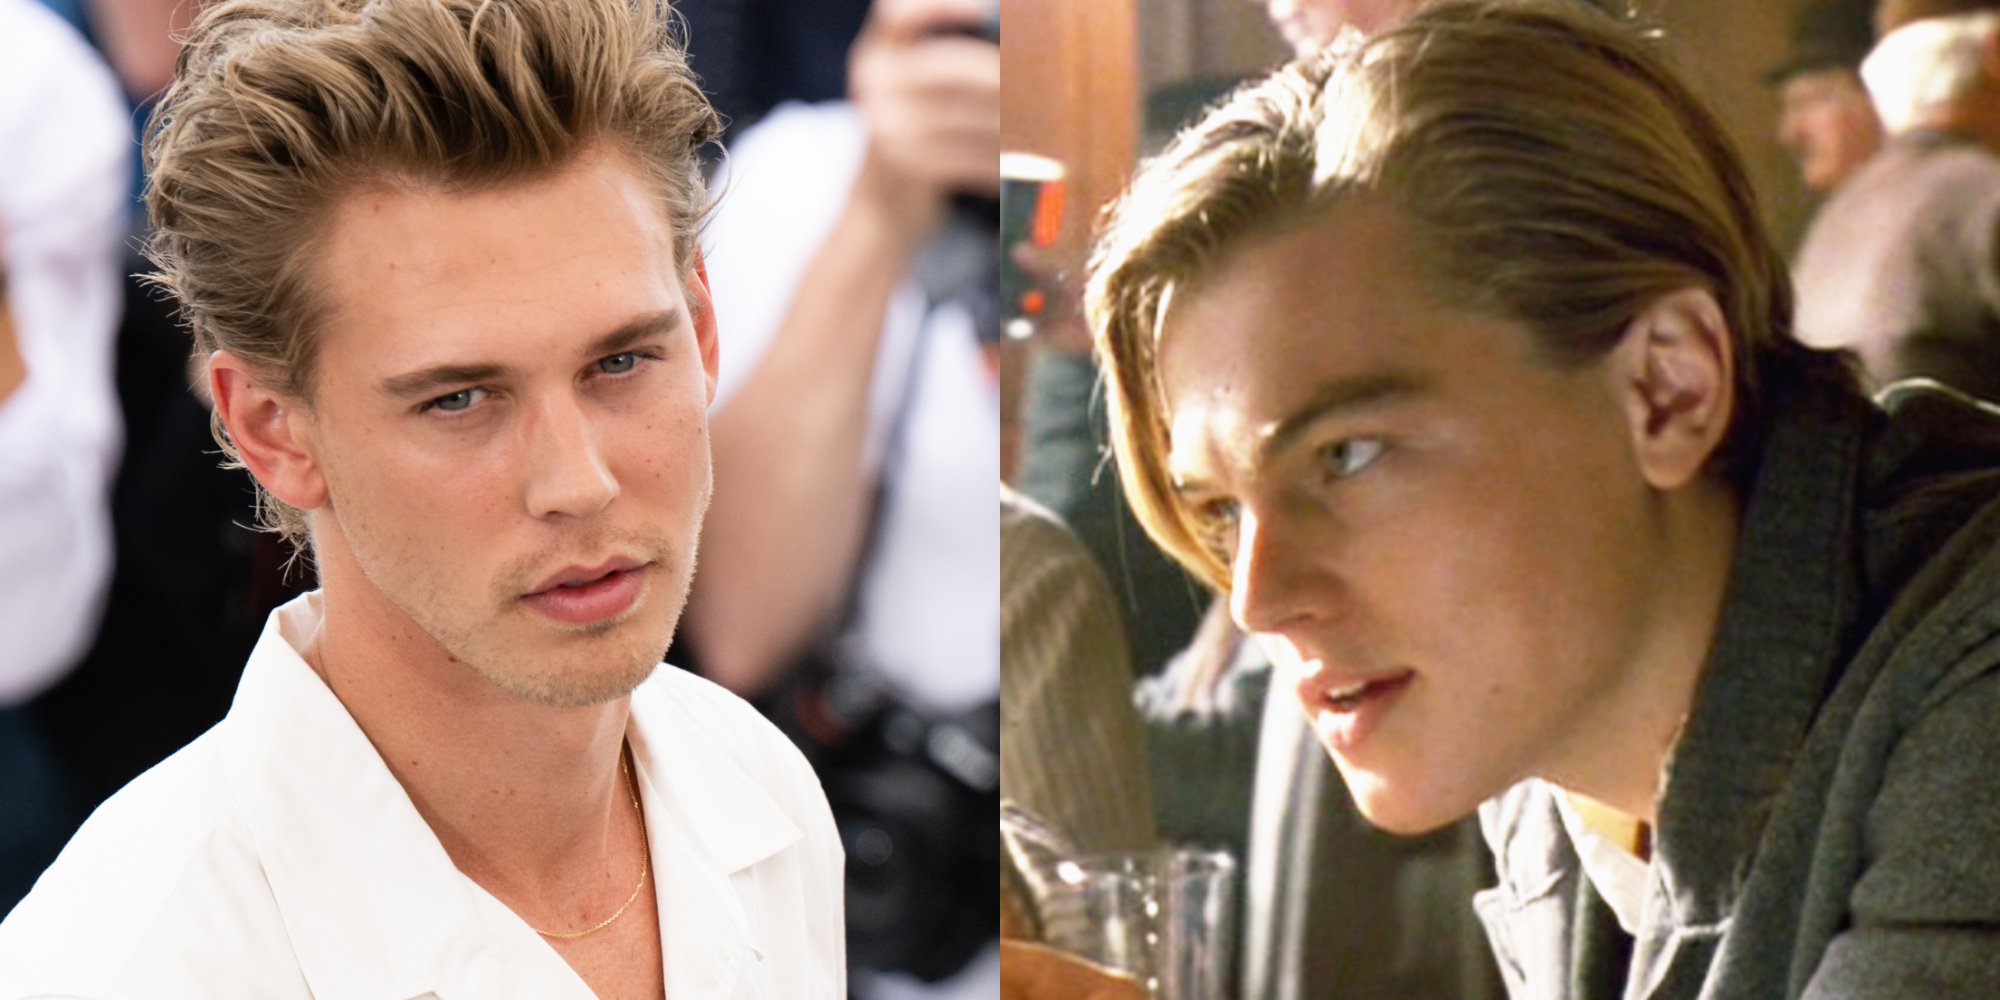 'Elvis' star Austin Butler and Leonardo DiCaprio in a set of side-by-side photographs.